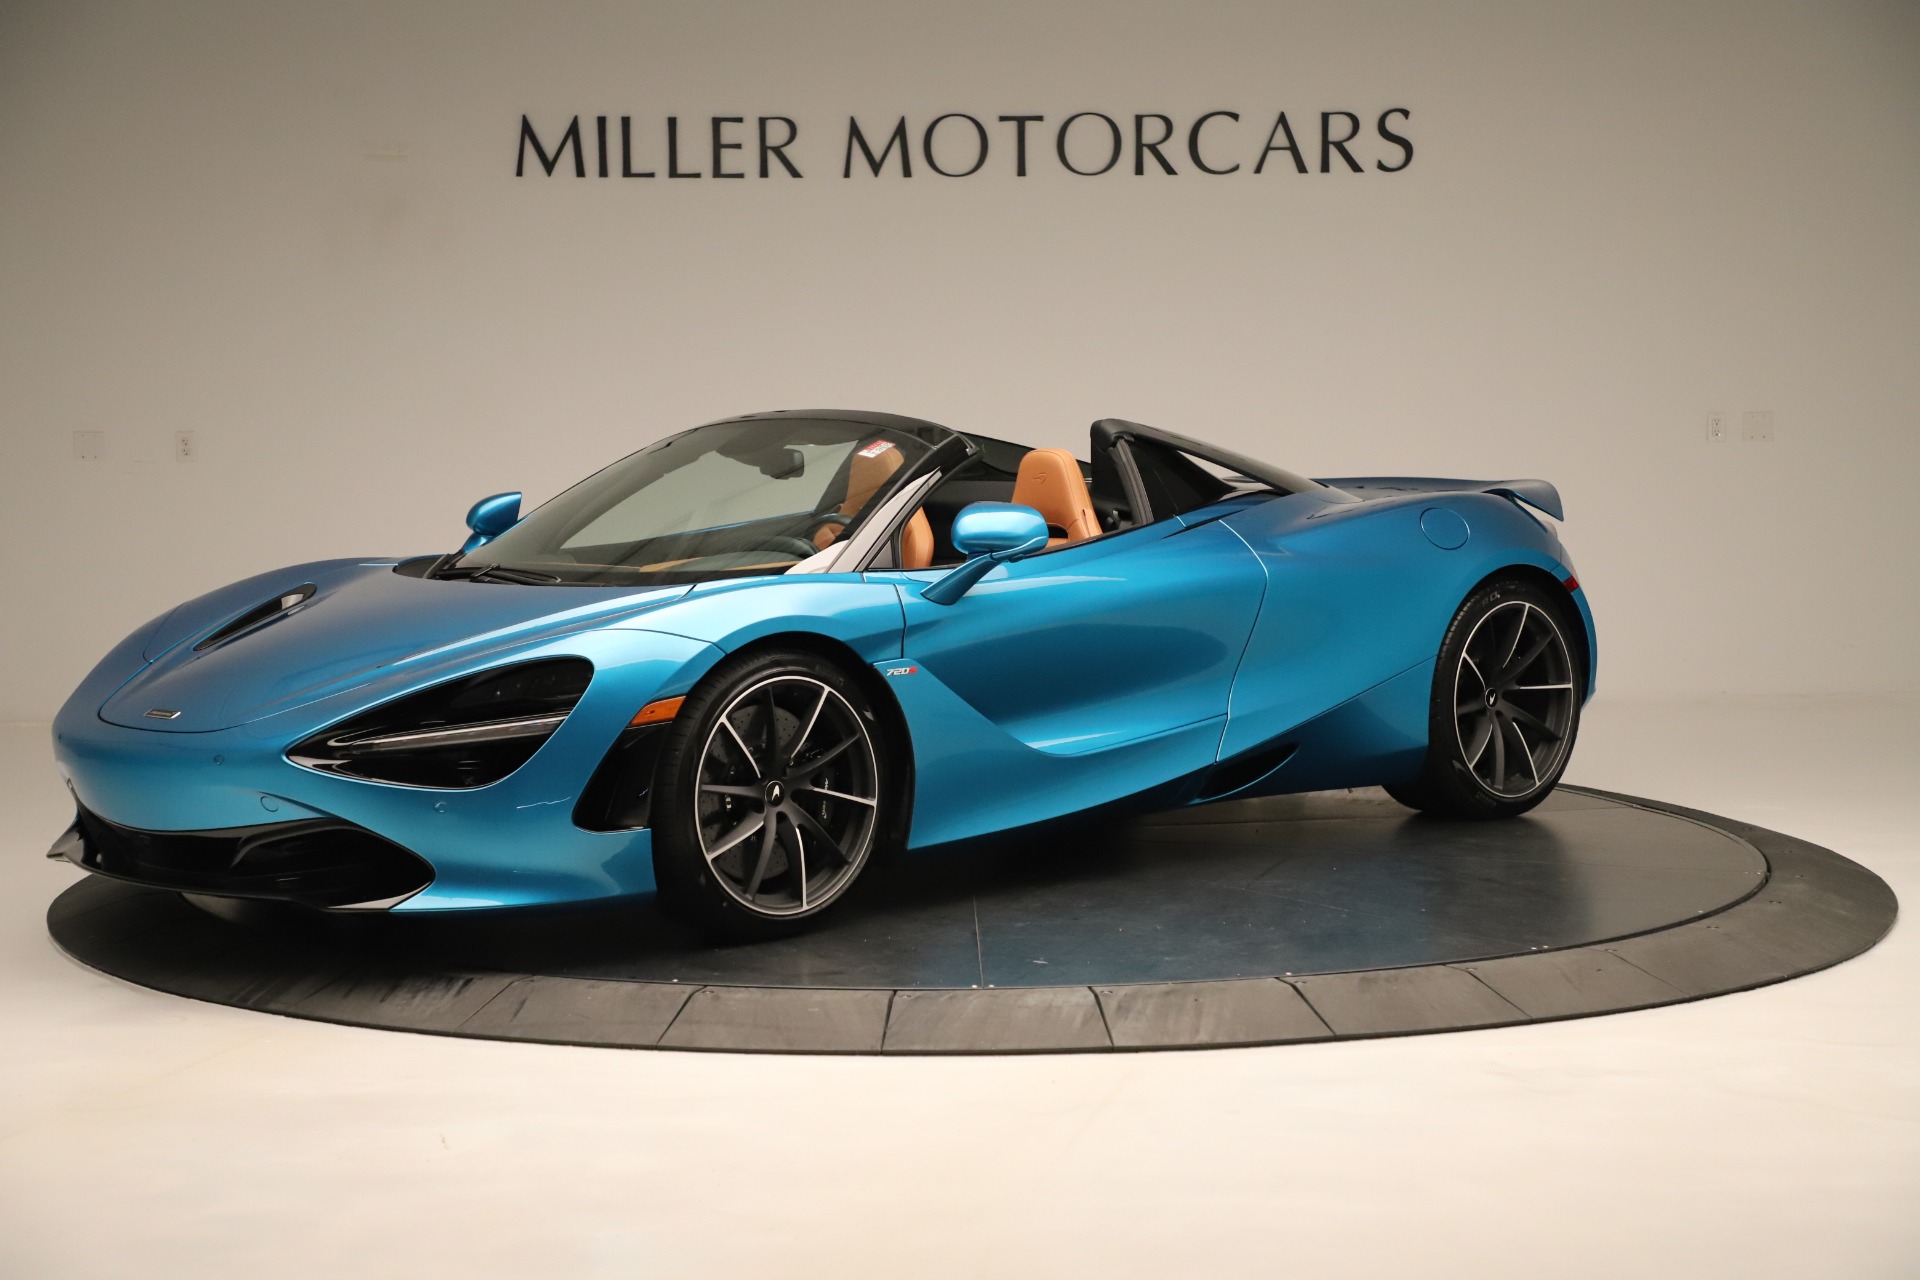 New 2020 McLaren 720S SPIDER Convertible for sale Sold at Bugatti of Greenwich in Greenwich CT 06830 1